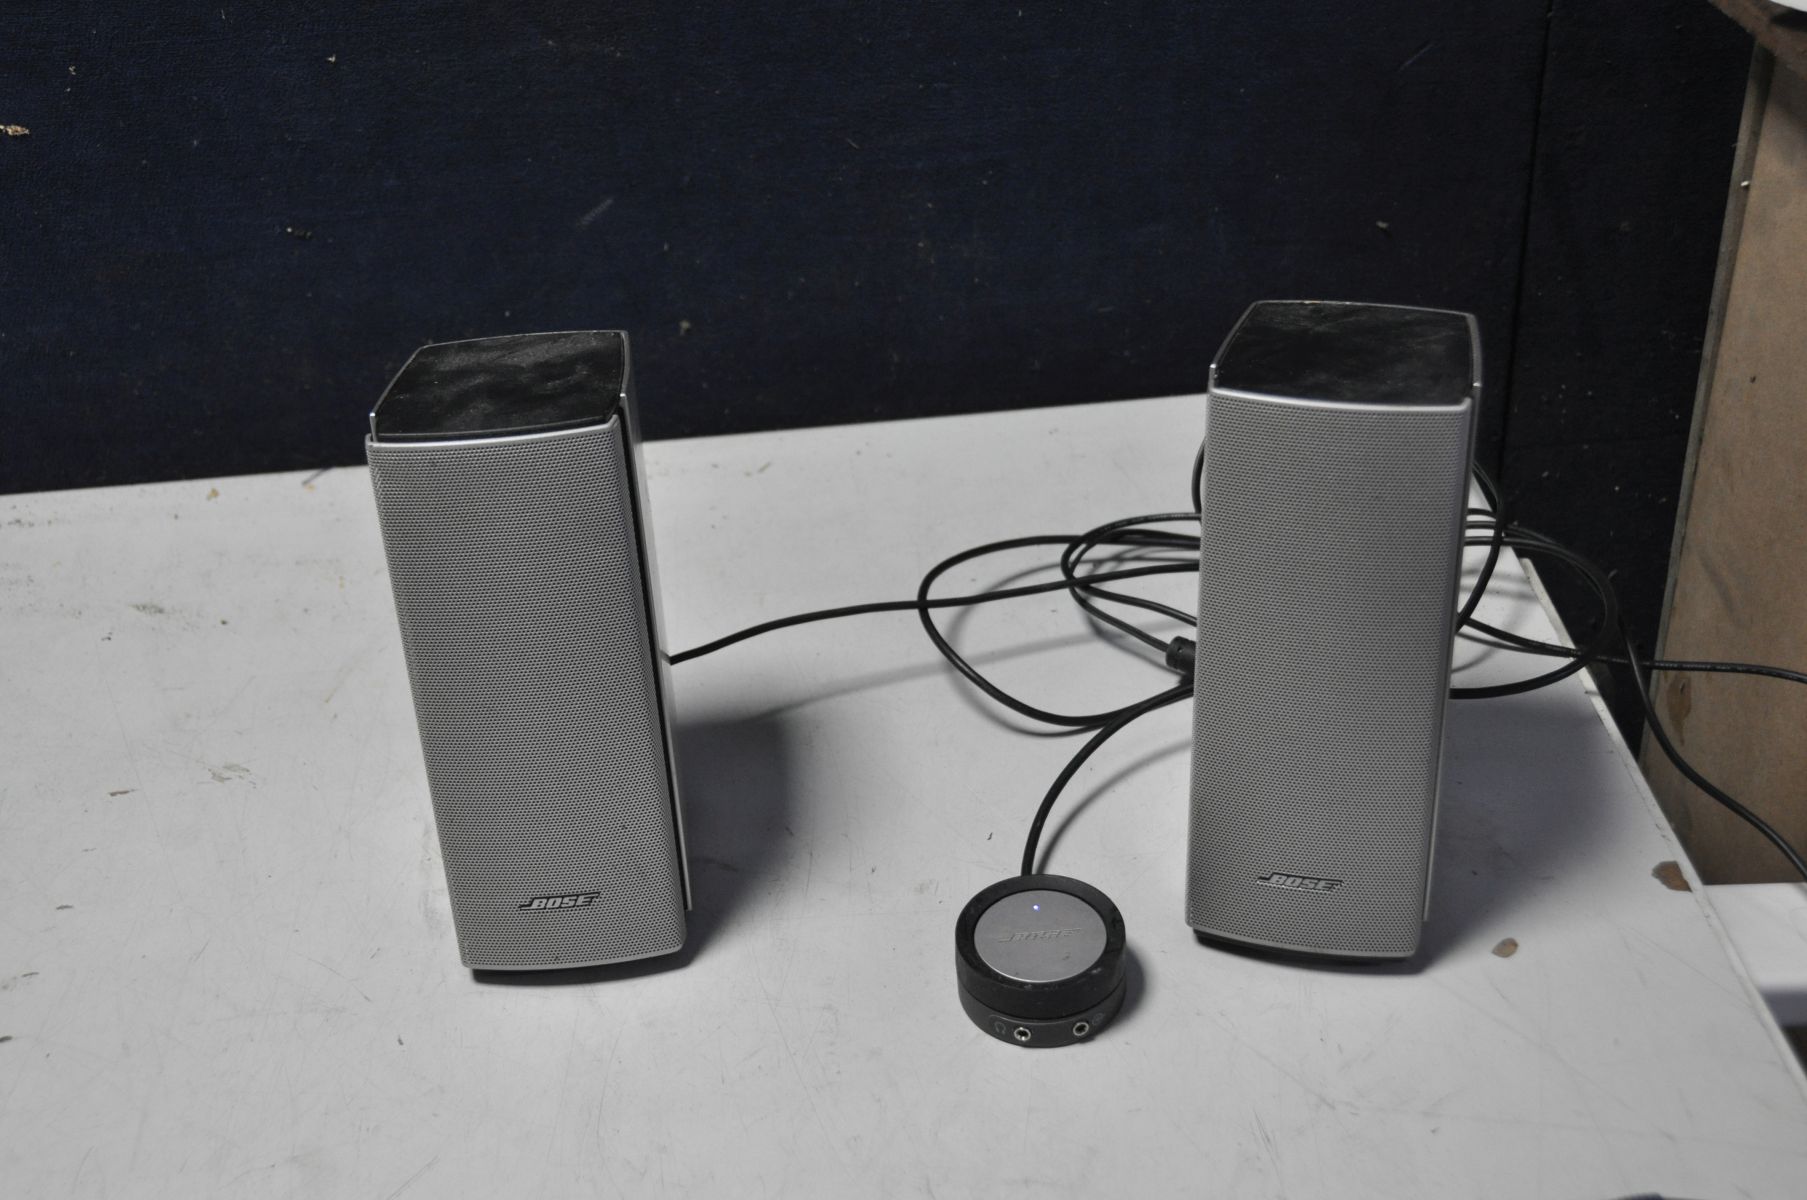 A BOSE COMPANION 20 ACTIVE MULTIMEDIA SPEAKER SYSTEM with control Pod, power supply, one active